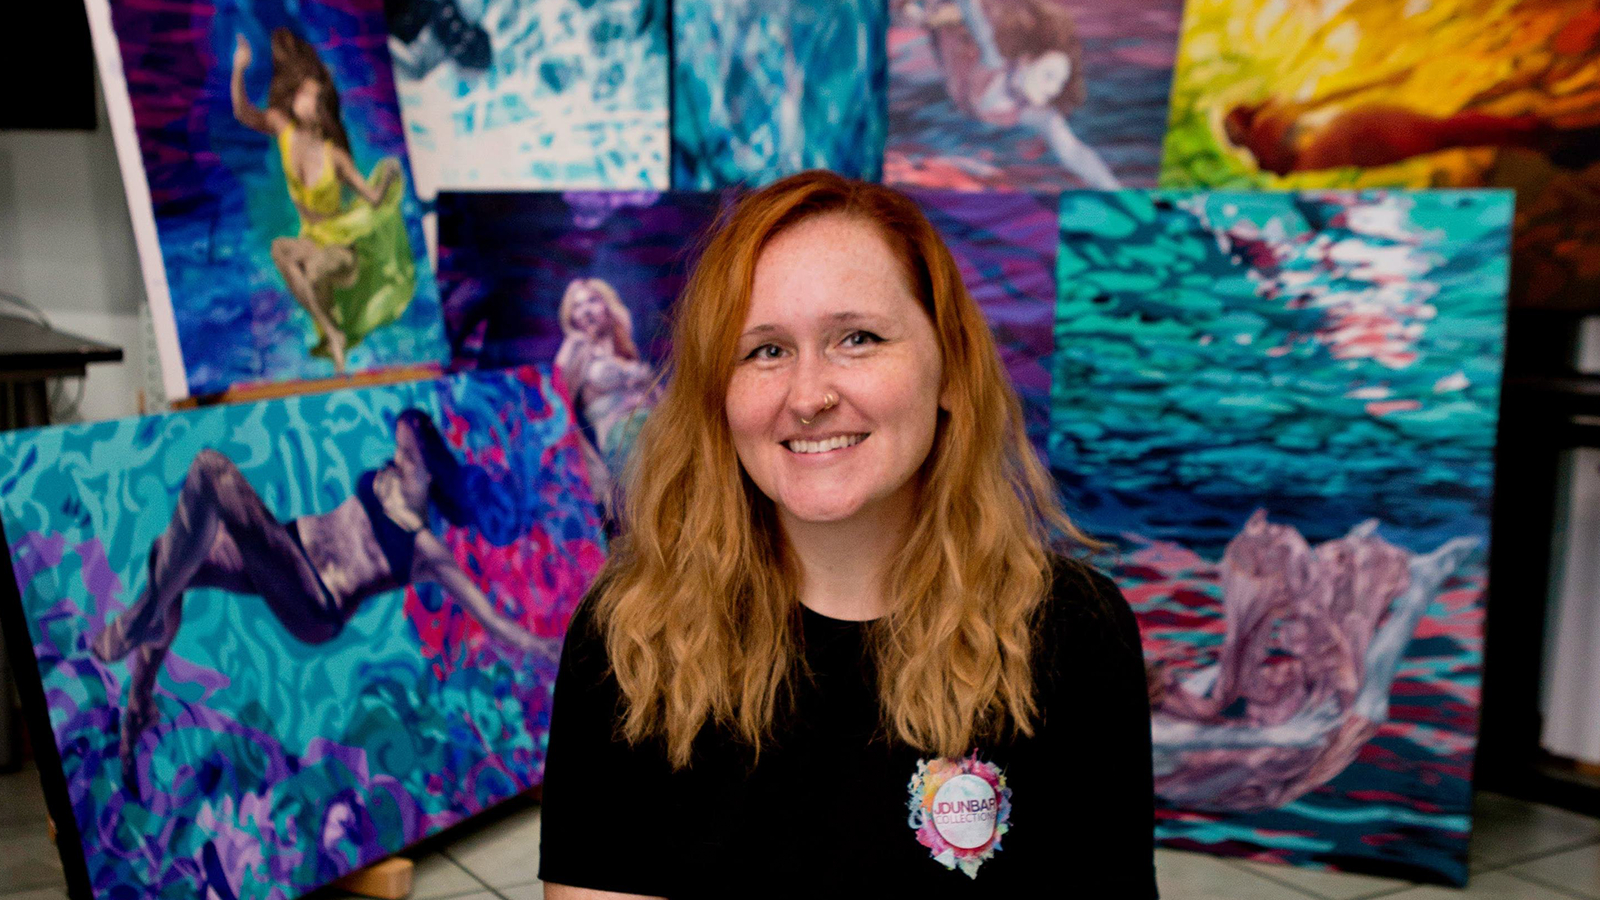 Jessica sits in front of several of her colorful paintings. She is wearing a black t-shirt and is smiling.